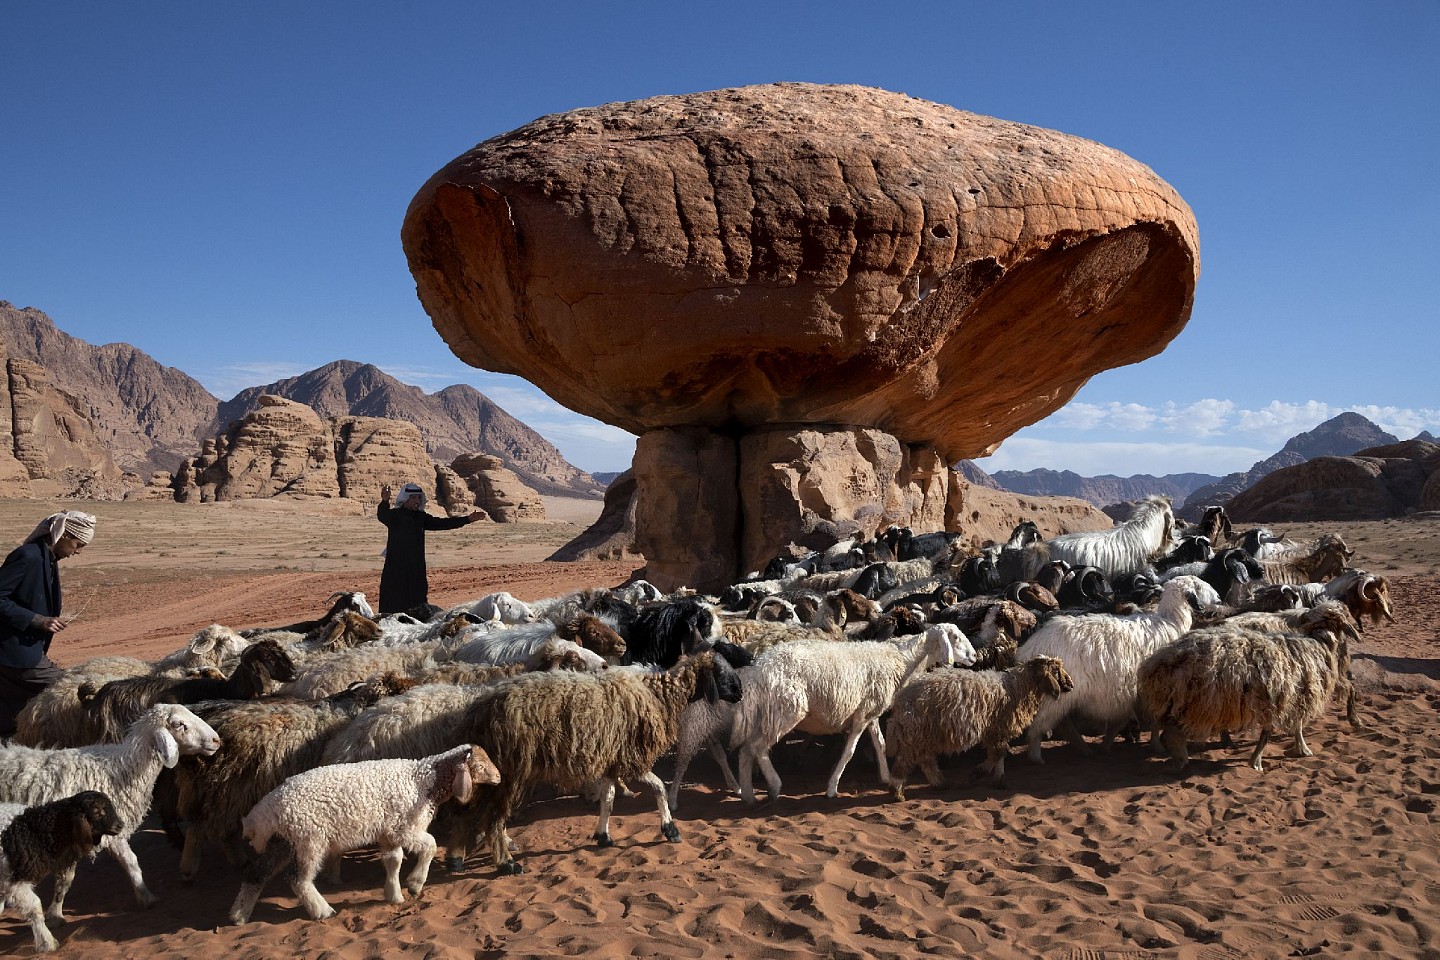 Steve McCurry, Shepherds in Wadi Rum, 2019
FujiFlex Crystal Archive Print
Price/Size on request